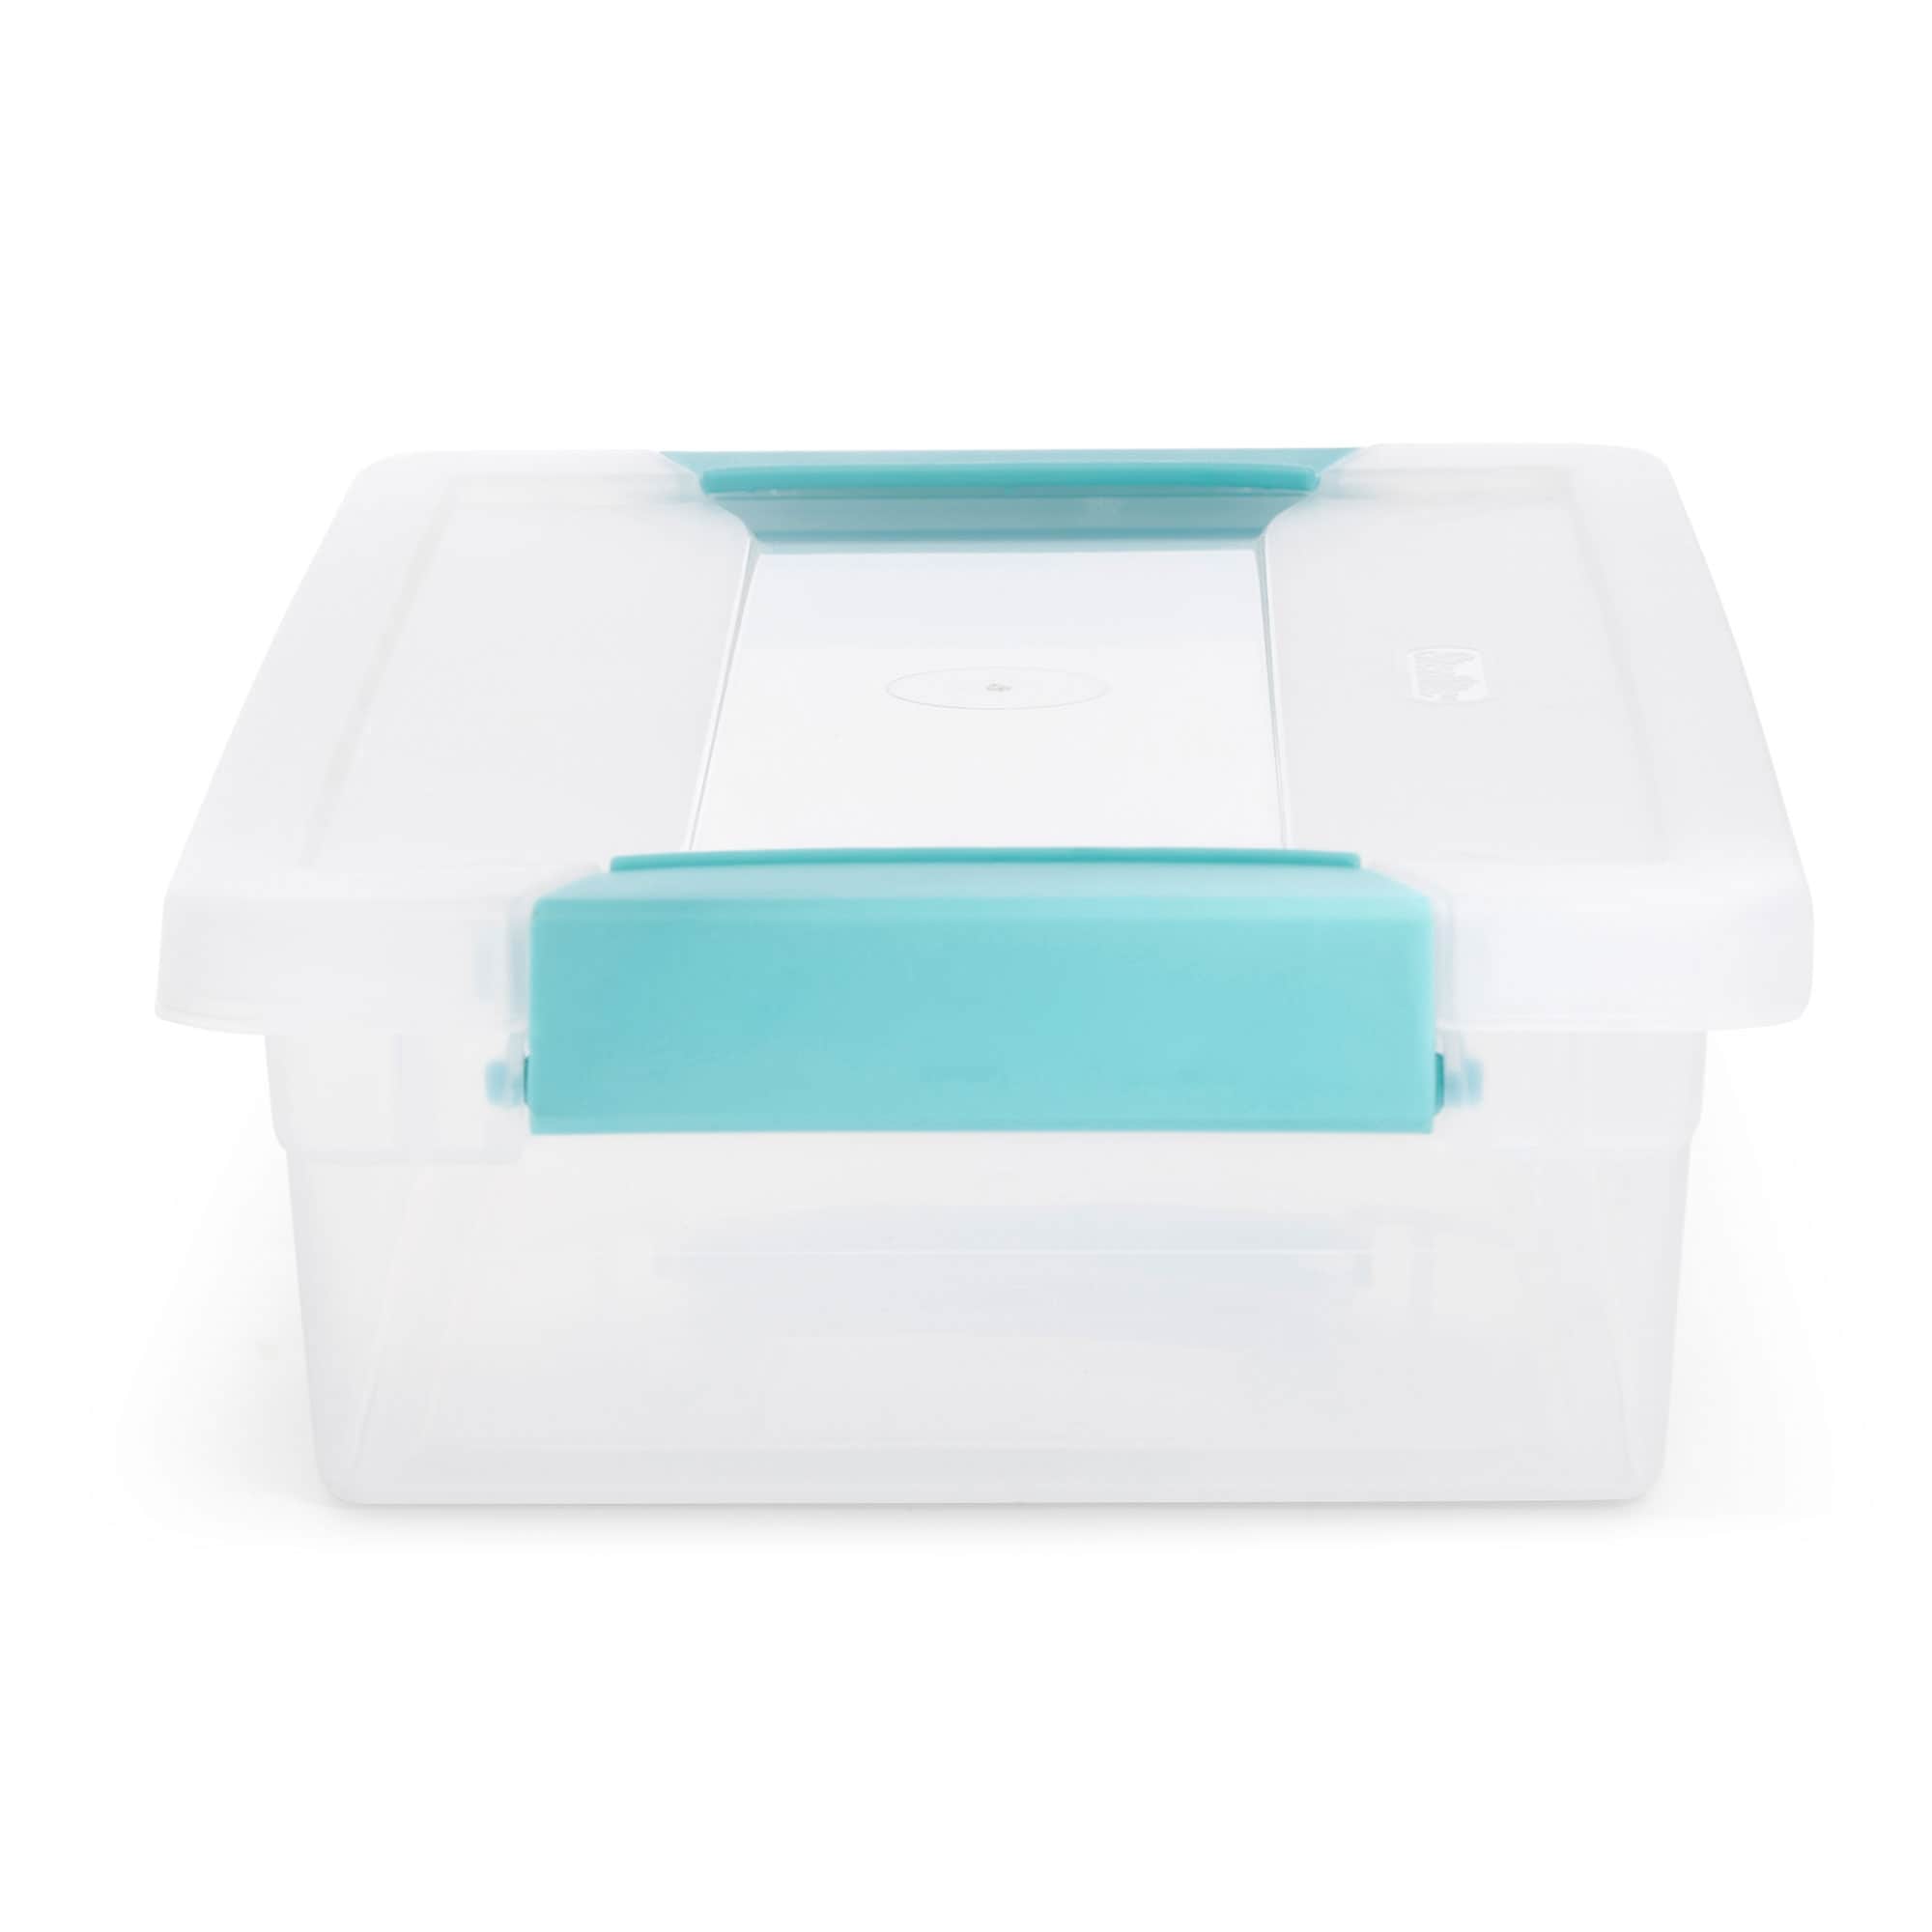 https://ak1.ostkcdn.com/images/products/is/images/direct/32862cbe18e3194b69162ed5375d2653b57f13af/Sterilite-Small-Clip-Box-Clear-Storage-Tote-Container-with-Latching-Lid%2C-12-Pack.jpg